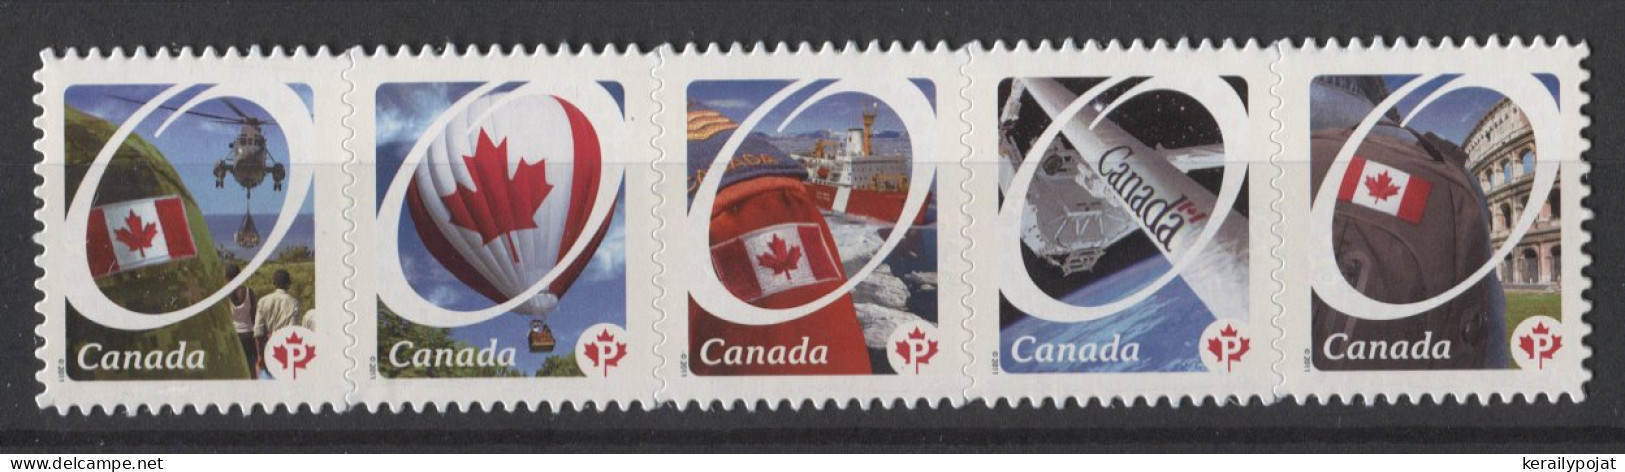 Canada - 2011 National Flag Self-adhesive MNH__(TH-24849) - Unused Stamps